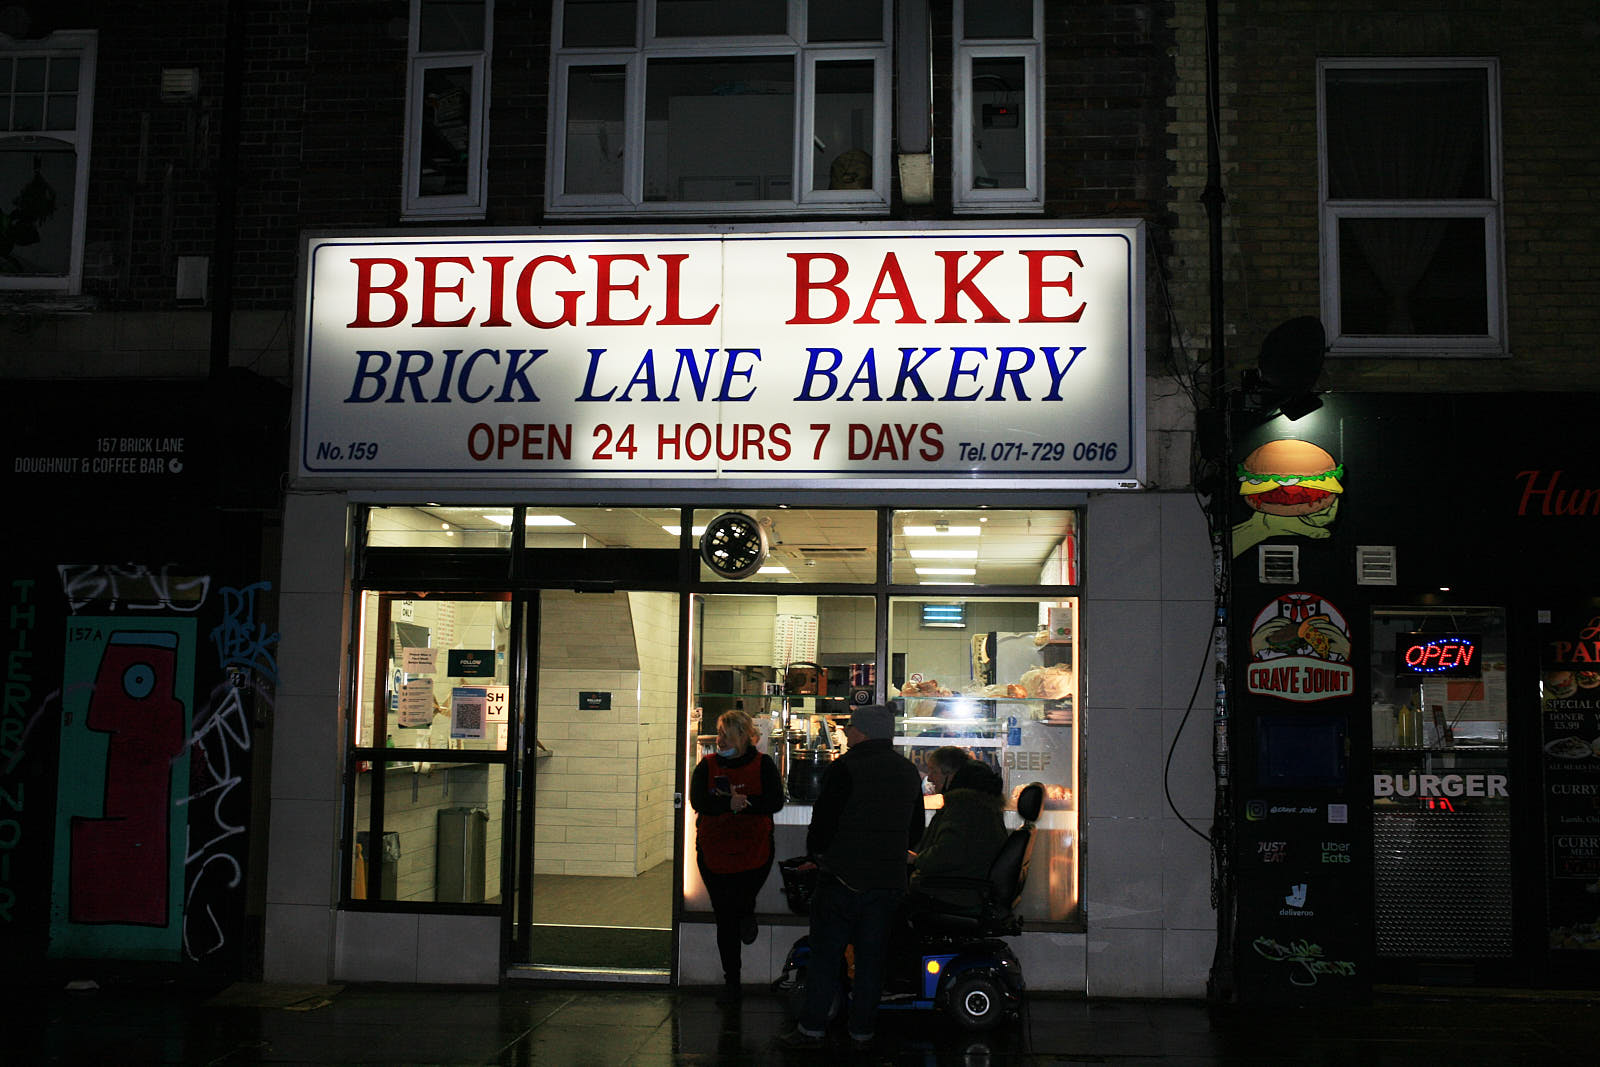 Beigel Bake in Brick Lane, its white and red sign standing out.